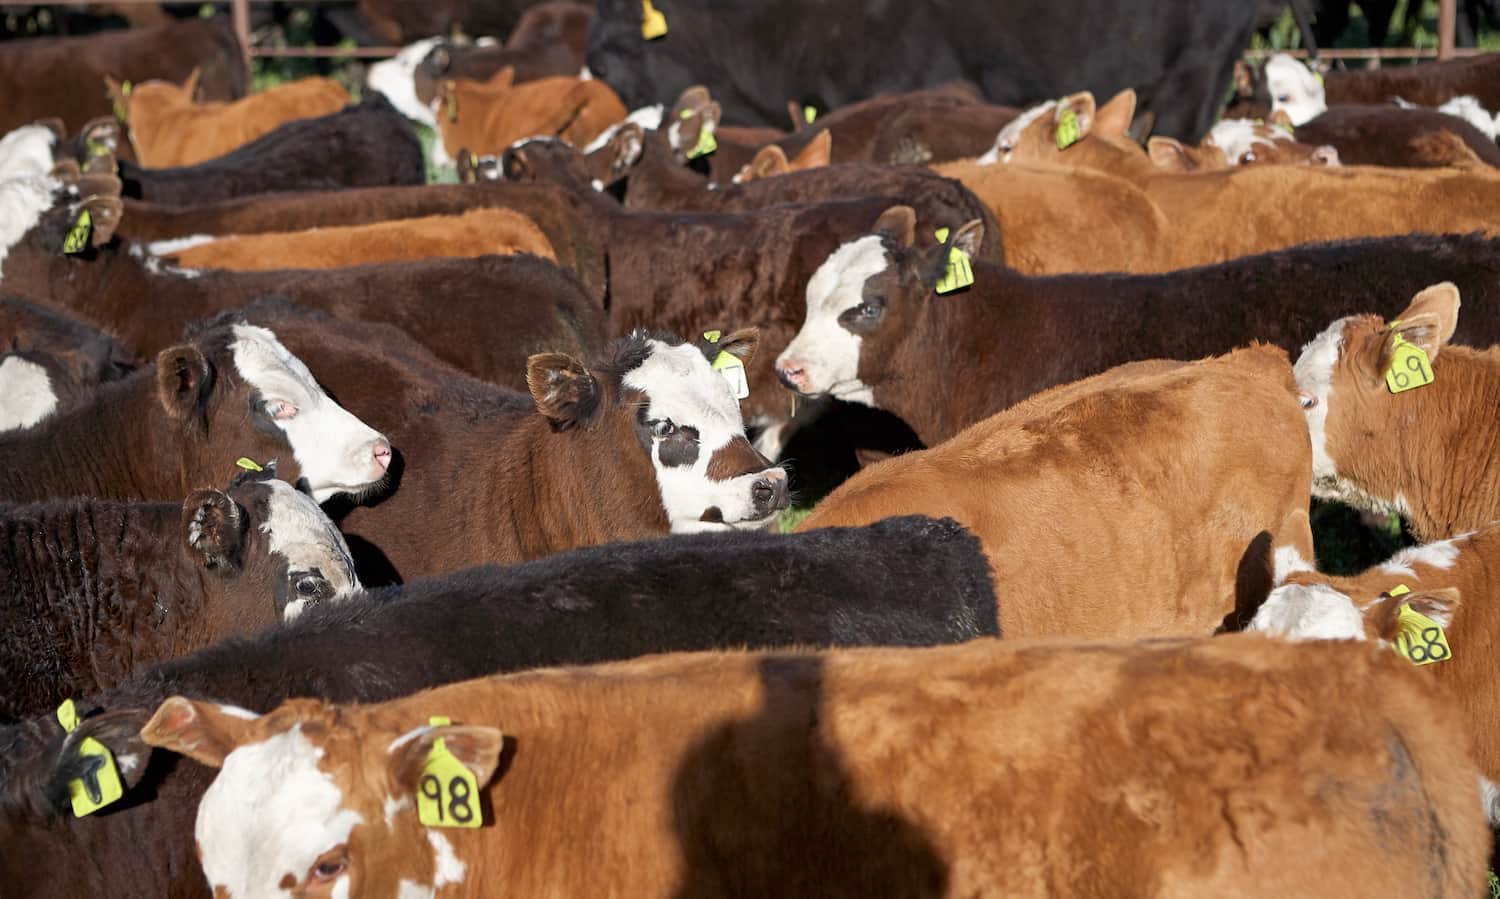 50 Groups Denounce Roundtable on Sustainable Beef as Greenwash